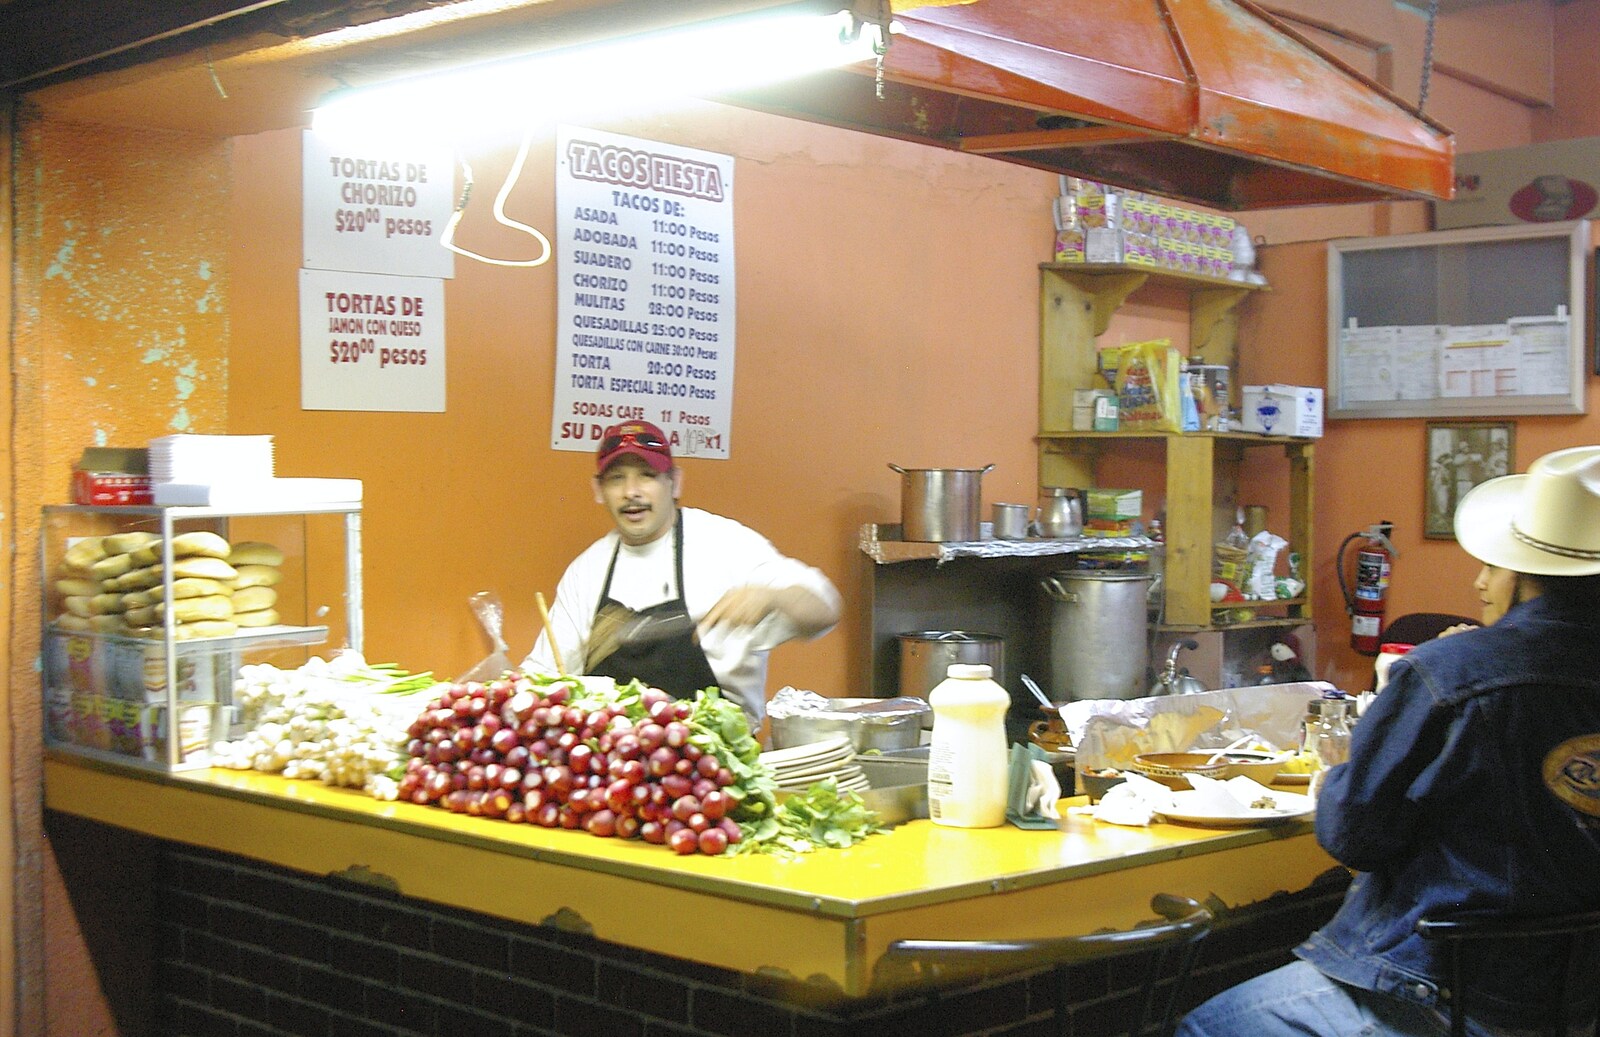 A dude in a taco shop from A Trip to Tijuana, Mexico - 25th March 2006